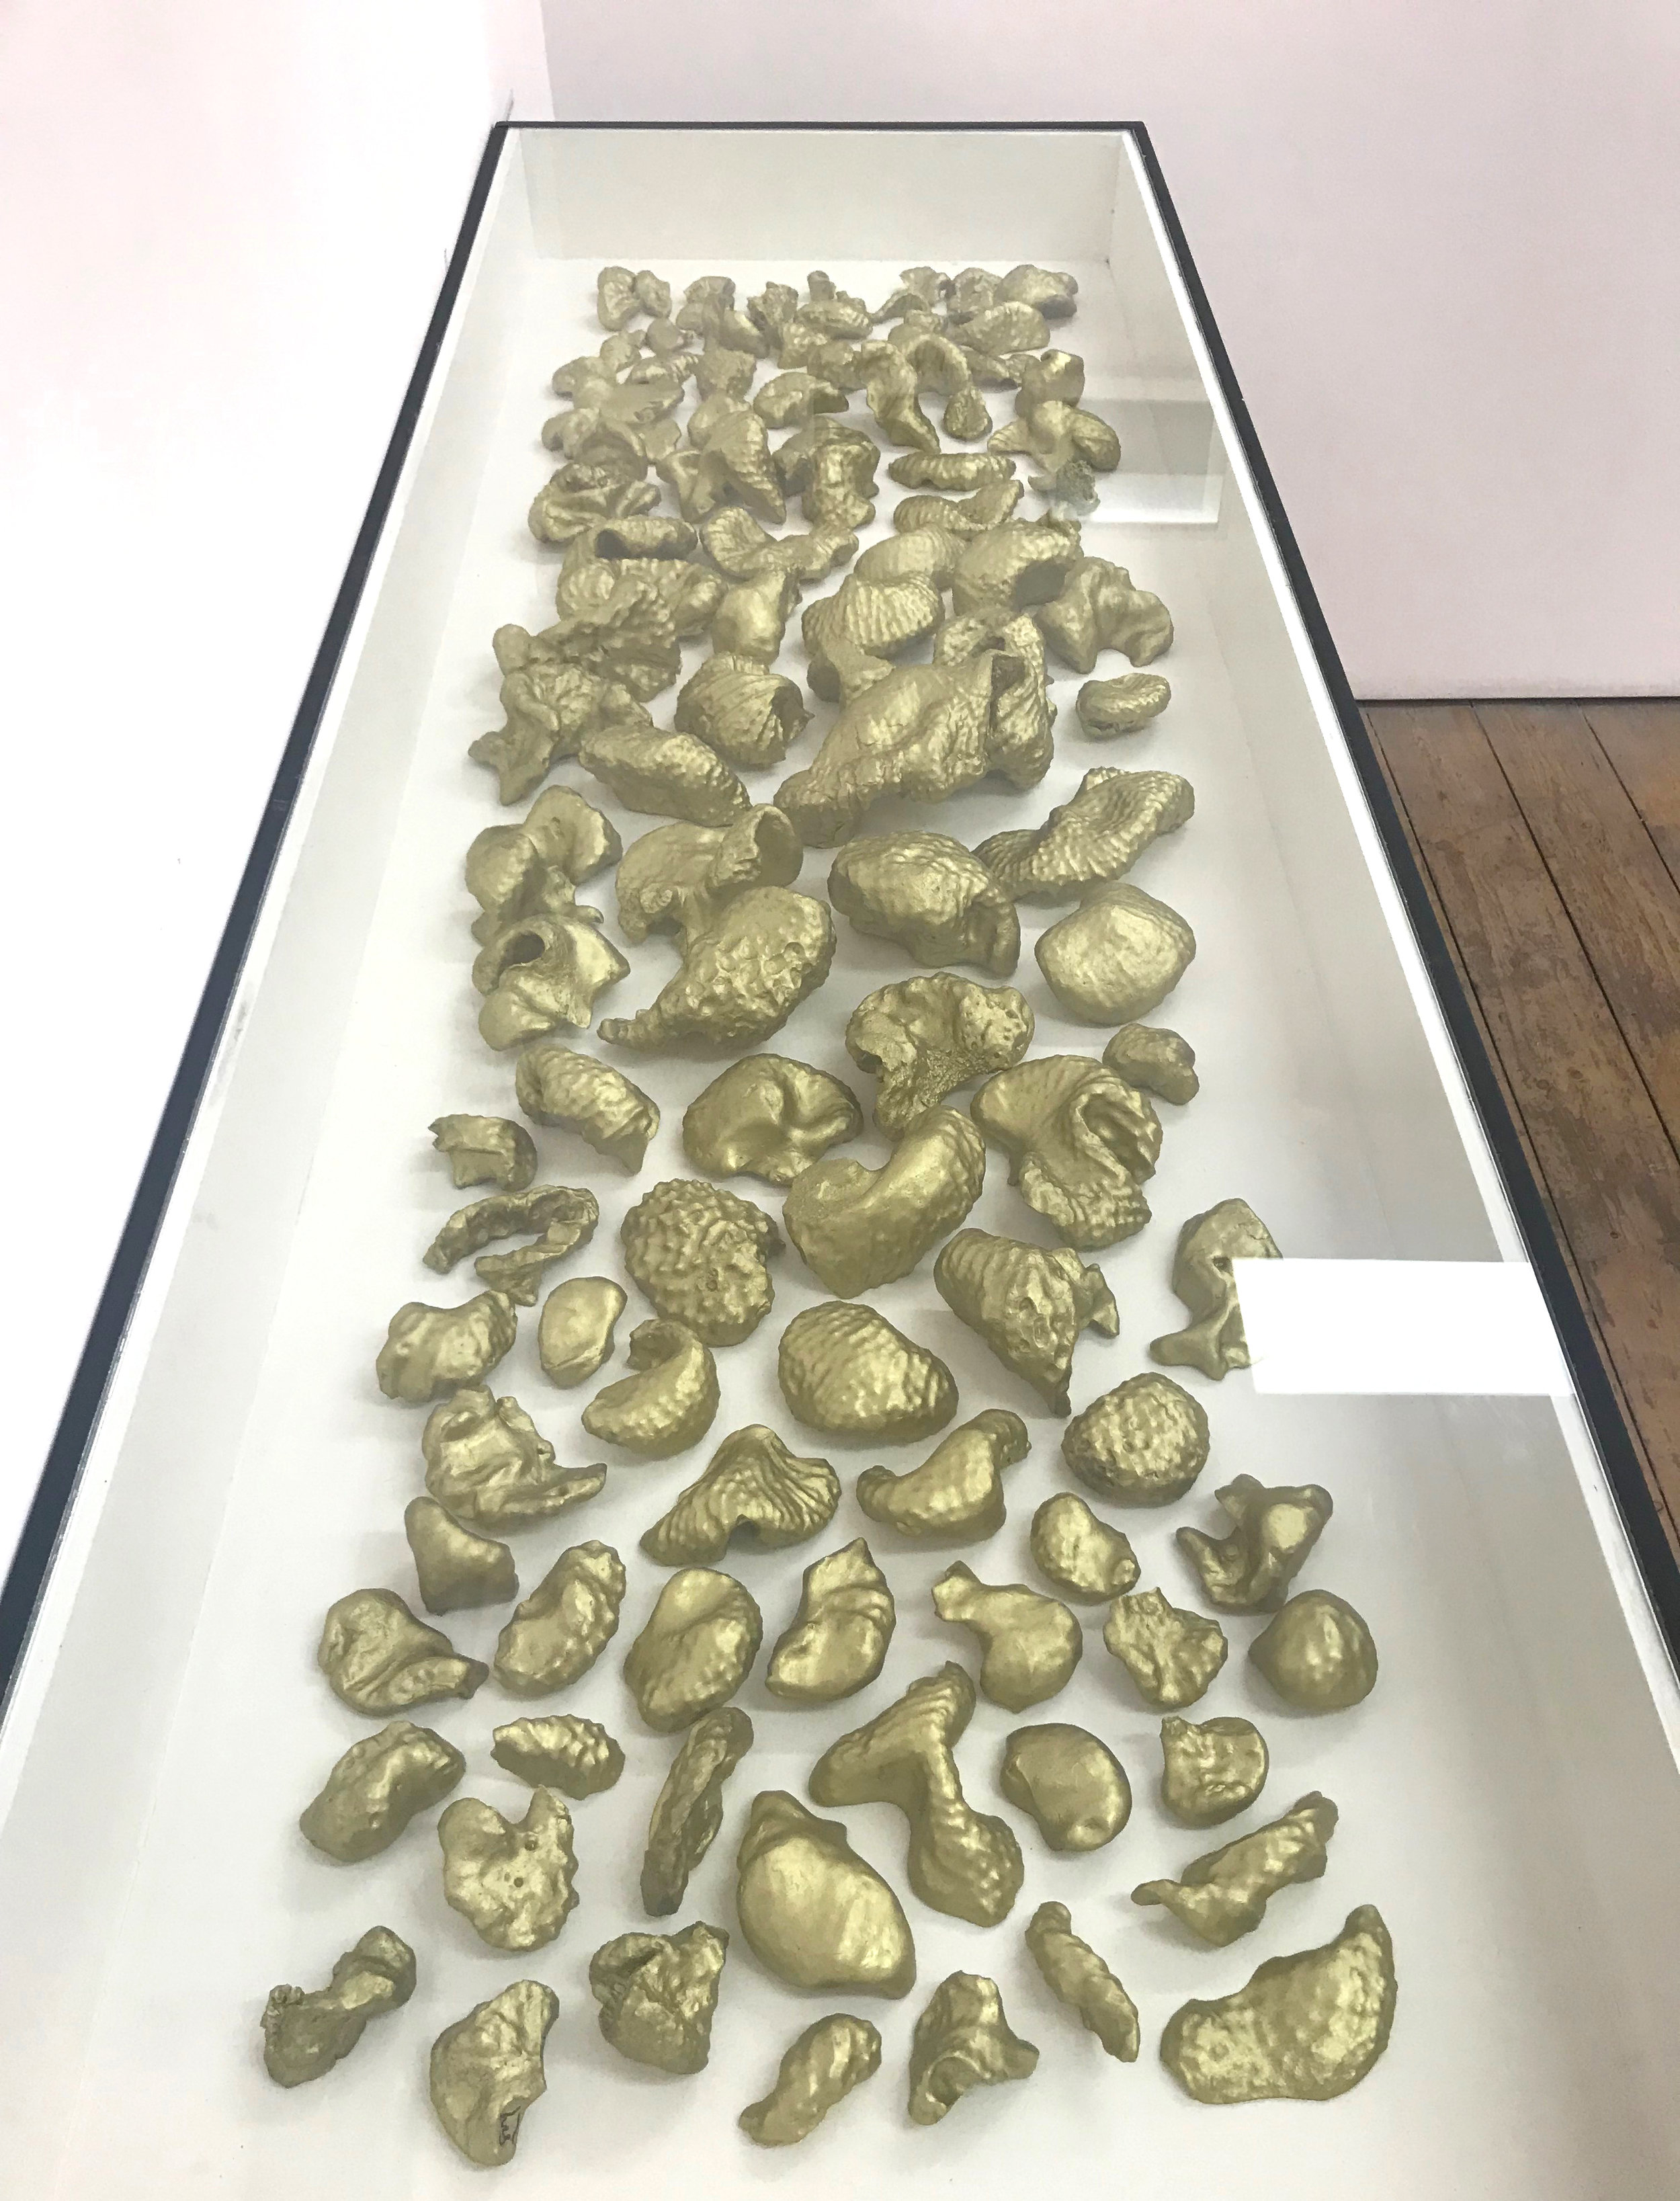   Sea-formed, 2017                                                                                  120, Gold painted casts of Kelp holdfasts                                                      Dimensions variable    